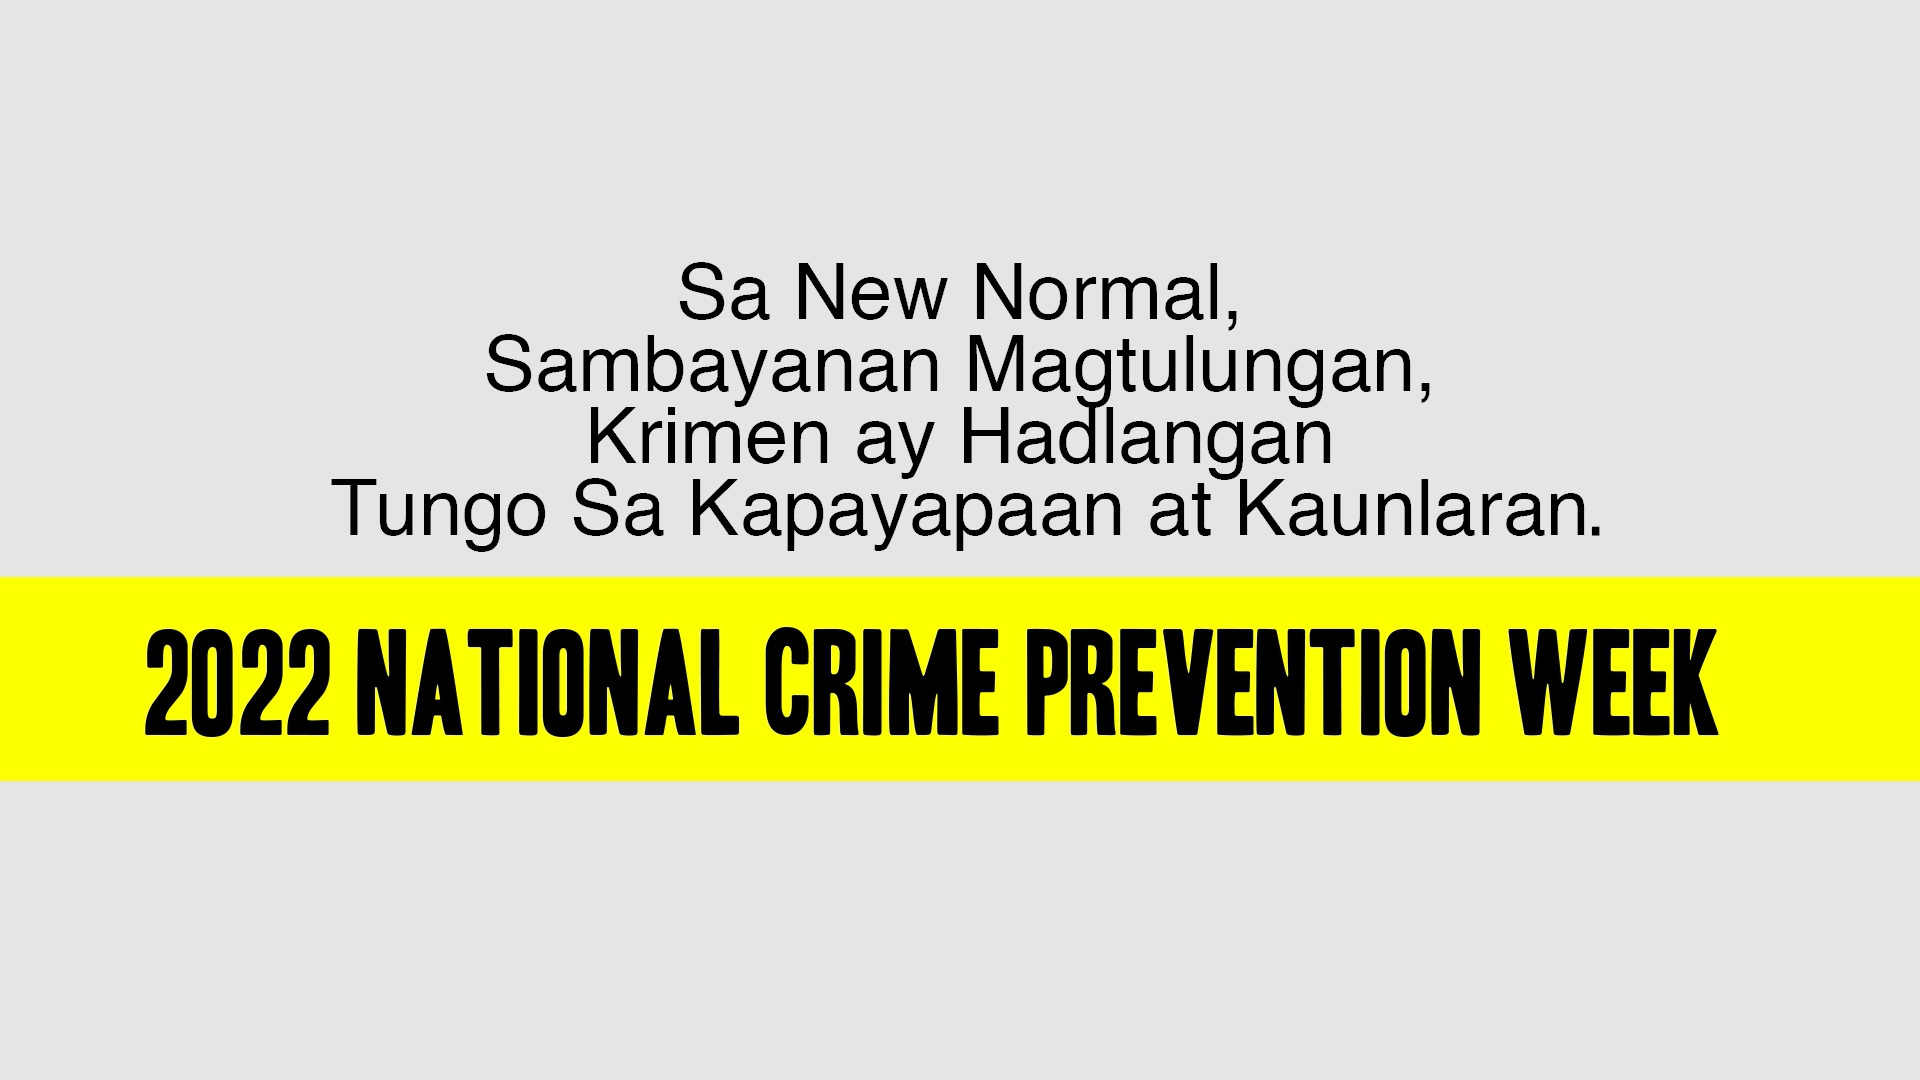 Cybercrimes in the Philippines